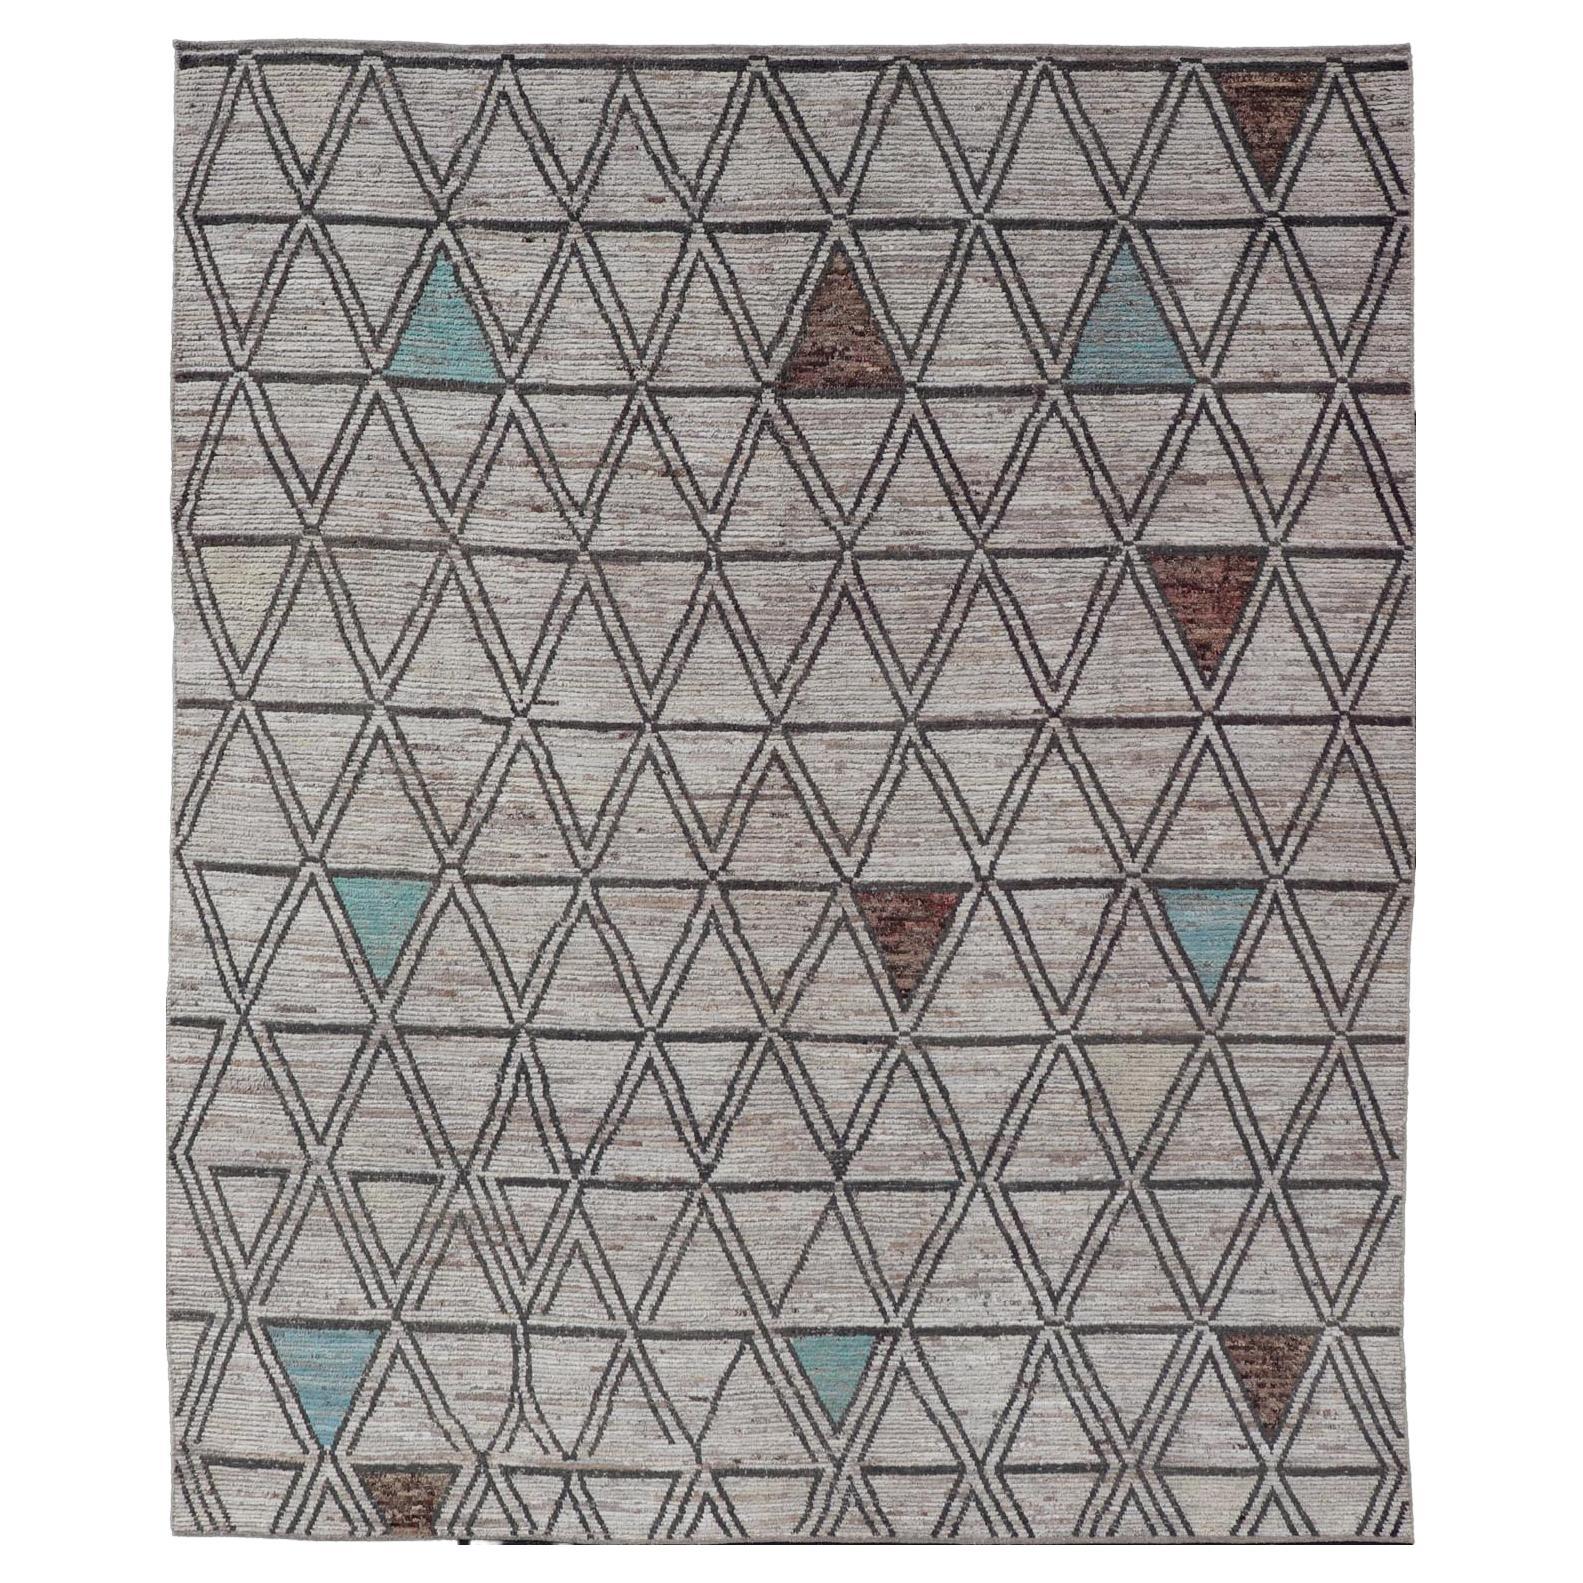 Large Moroccan Style Distressed Modern Rug in Diamond and Triangle Design